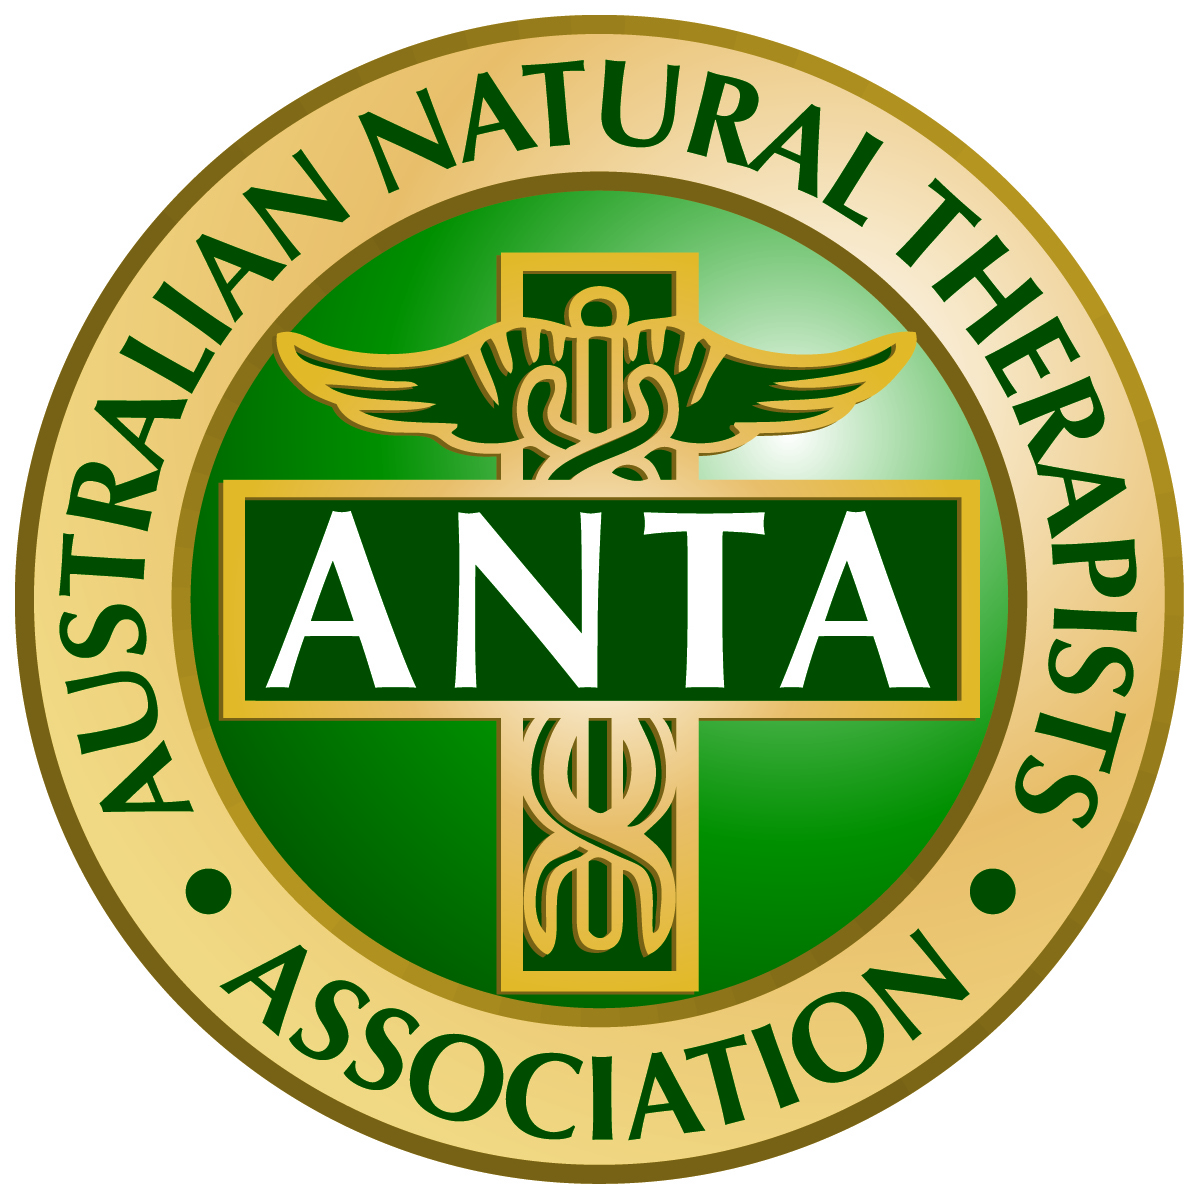 Image result for australian natural therapists association